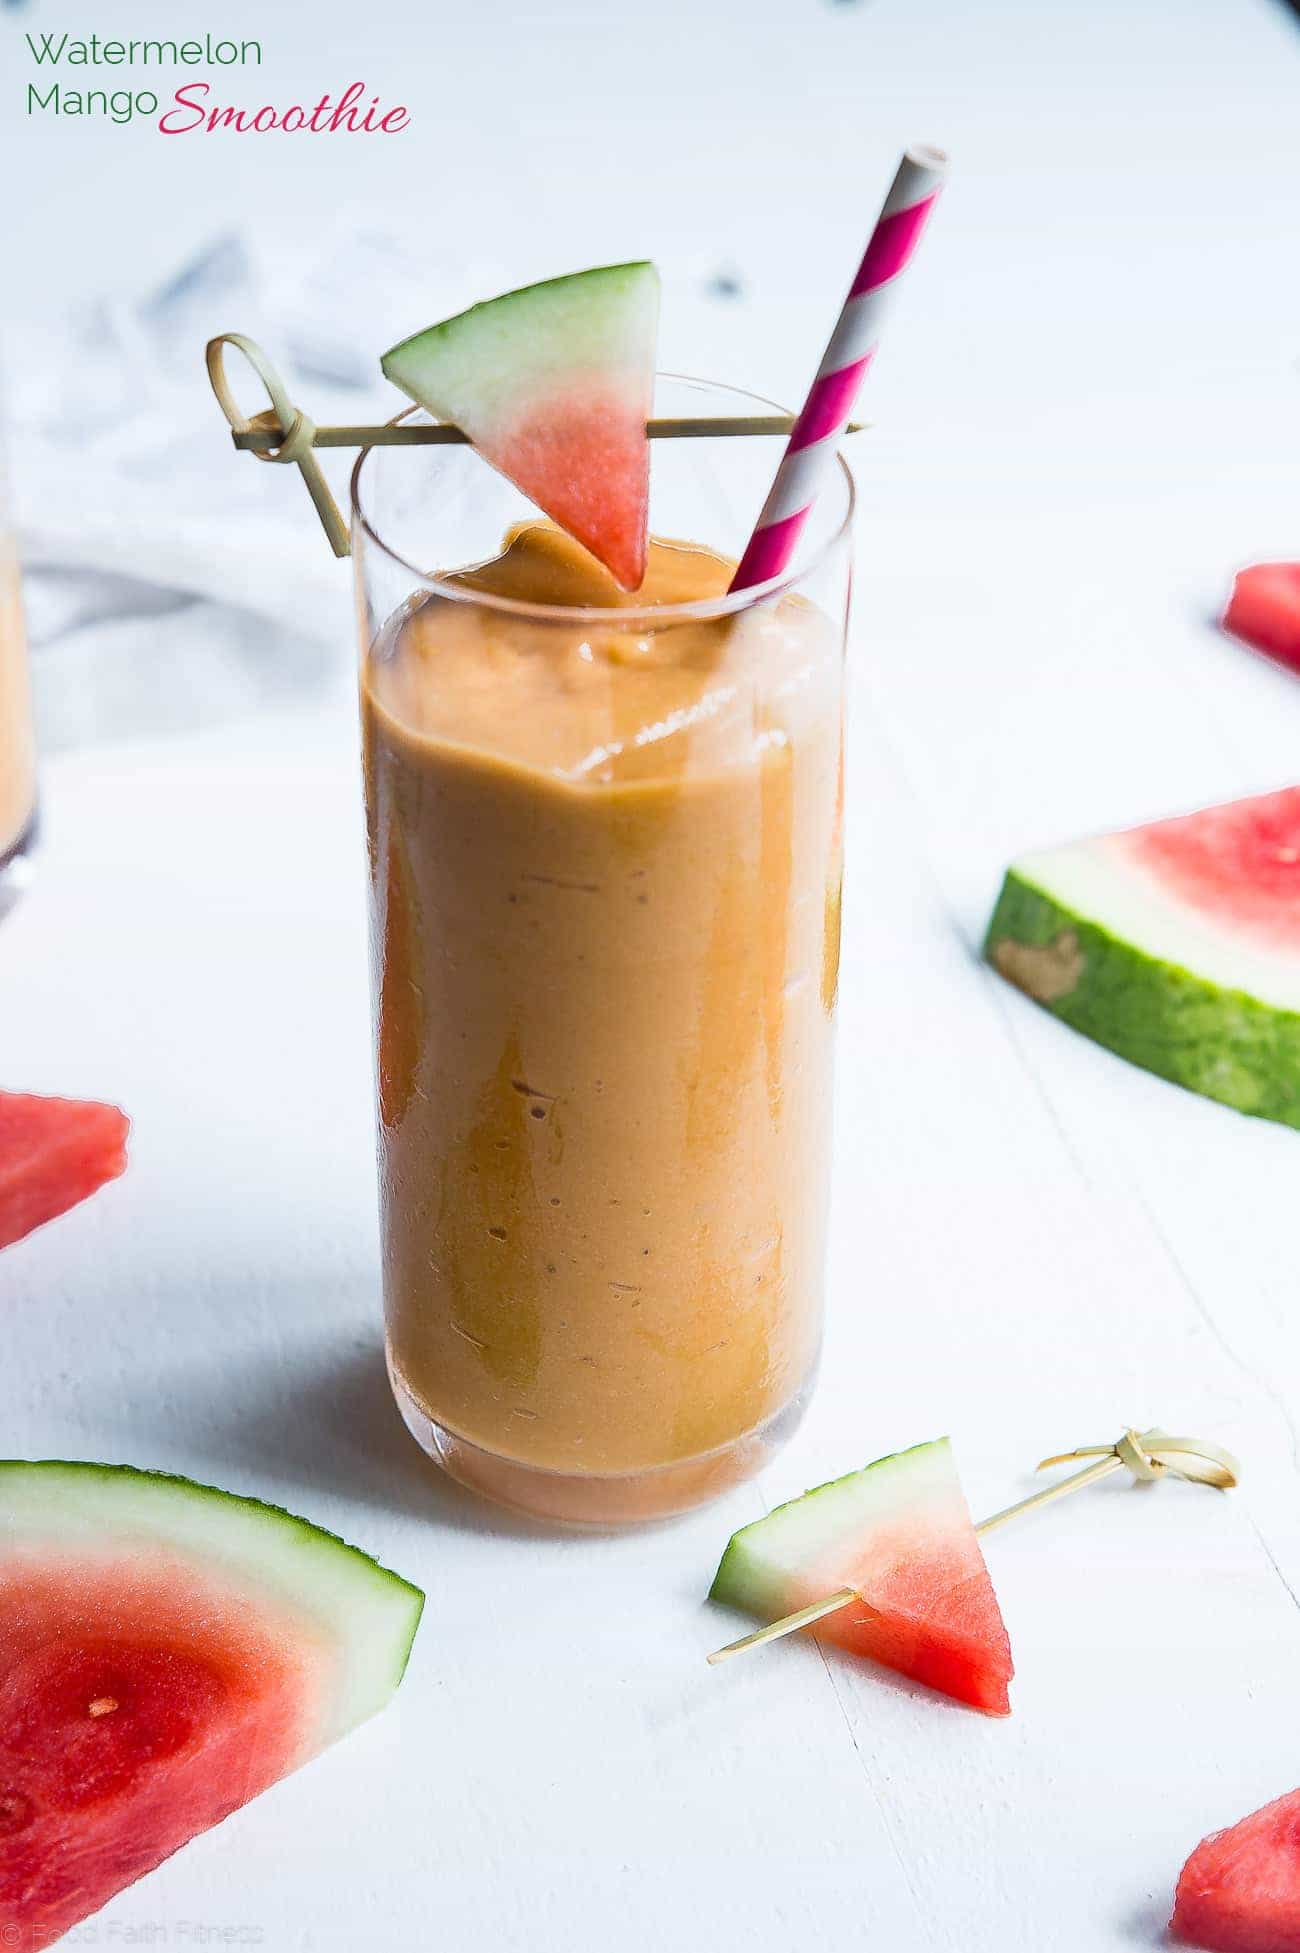 Watermelon Mango Avocado Smoothie - This healthy 4 ingredient smoothie is an easy, vegan, paleo and whole30 compliant summer breakfast or snack that is ready in 5 minutes! | Foodfaithfitness.com | @FoodFaithfit